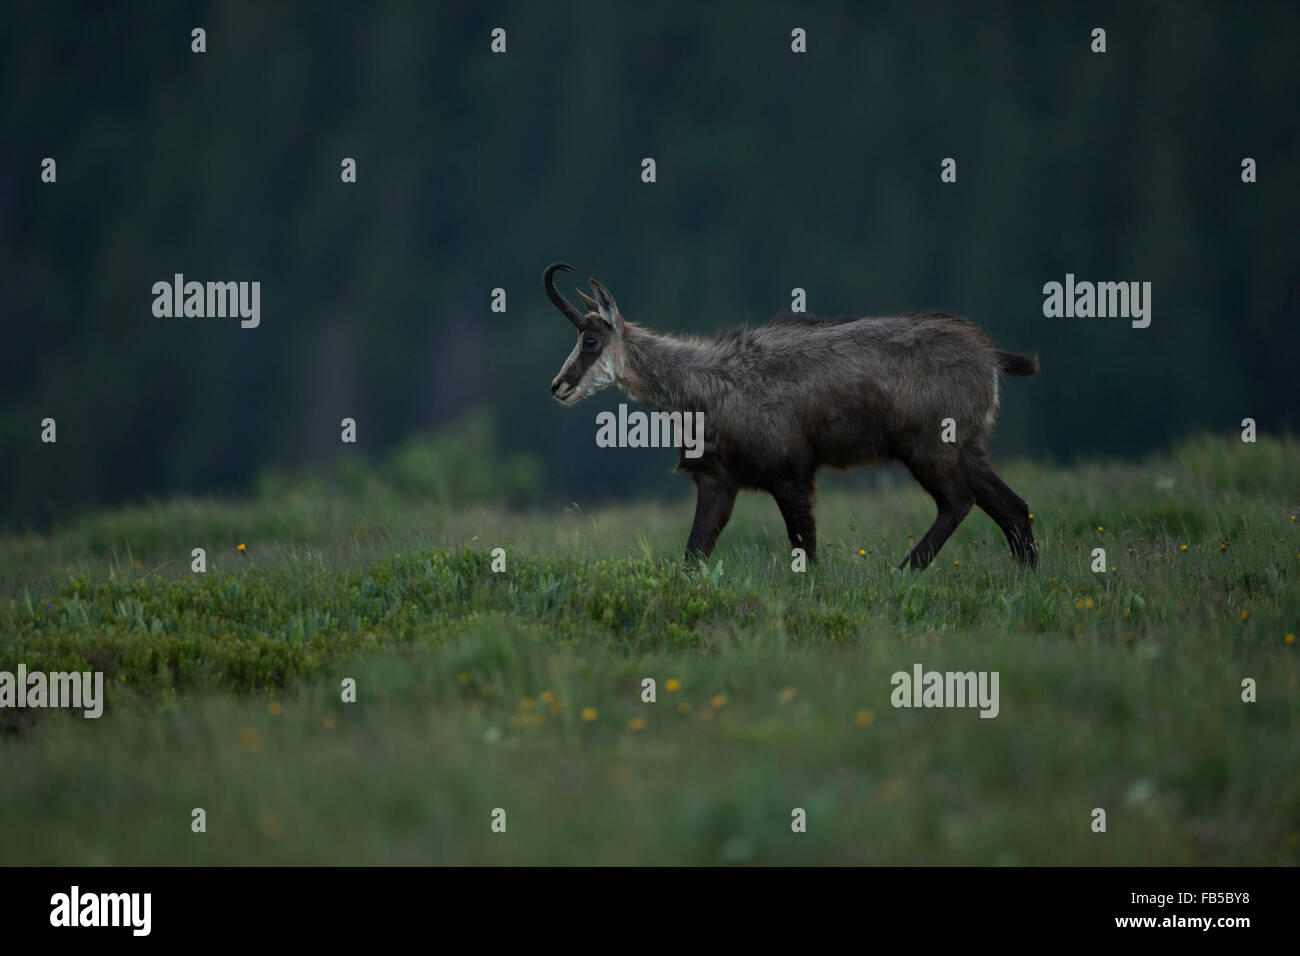 Chamois / Gaemse ( Rupicapra rupicapra ) searching for food on an alpine pasture at dawn, early in the morning. Stock Photo